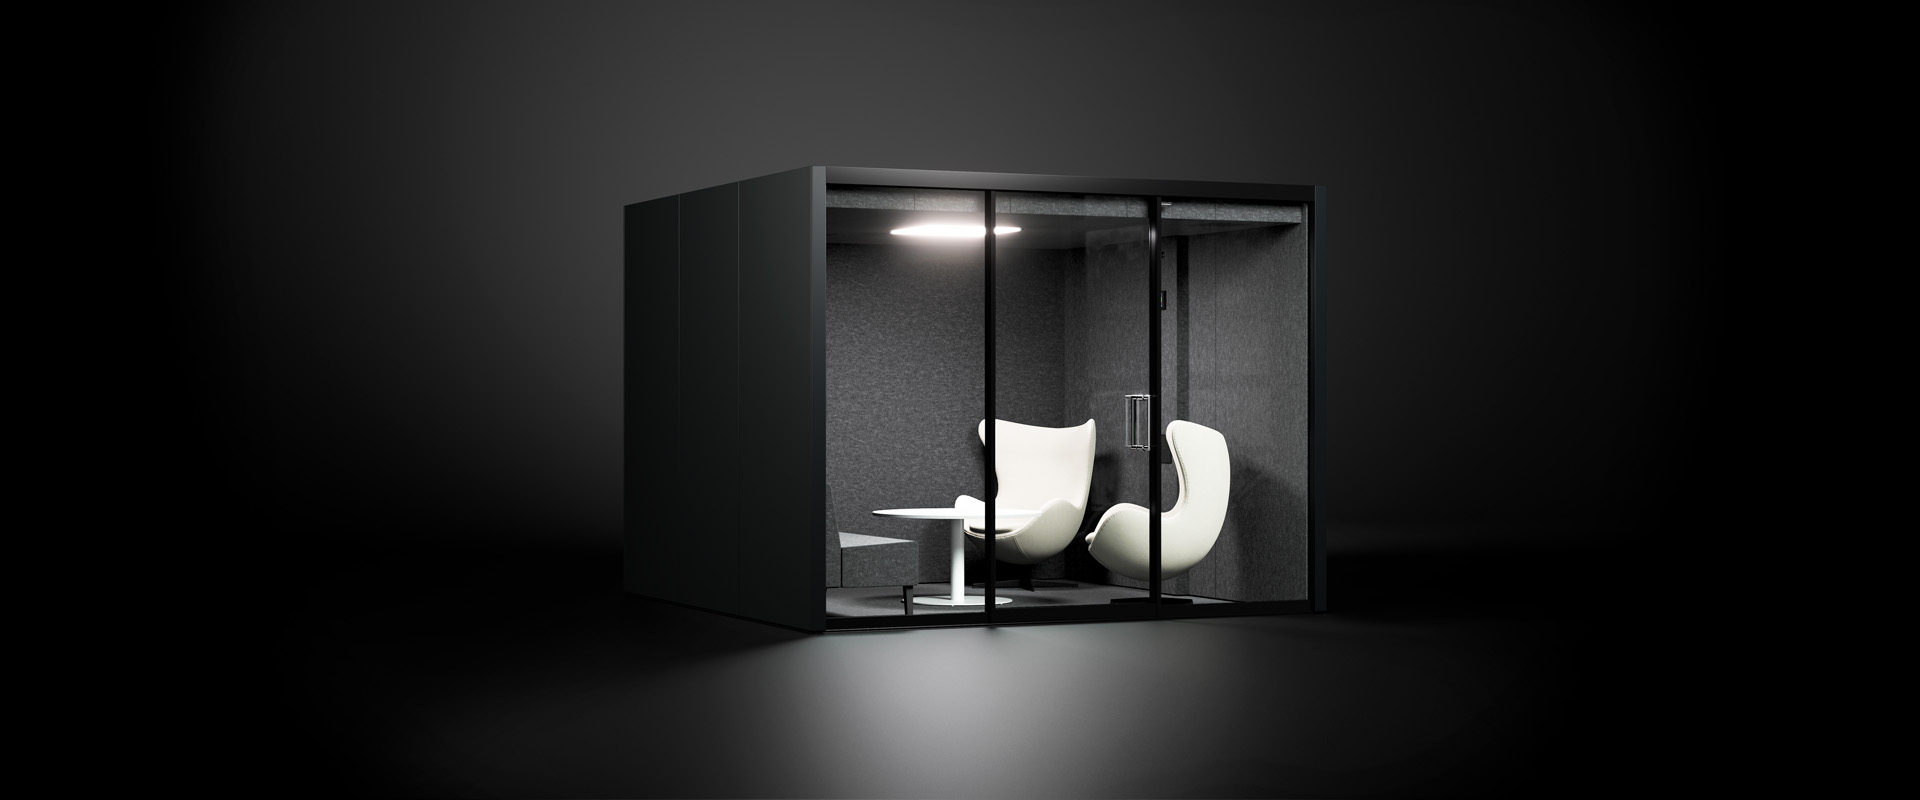 VETROSPACE XL soundproof lounge meeting pod room in black background